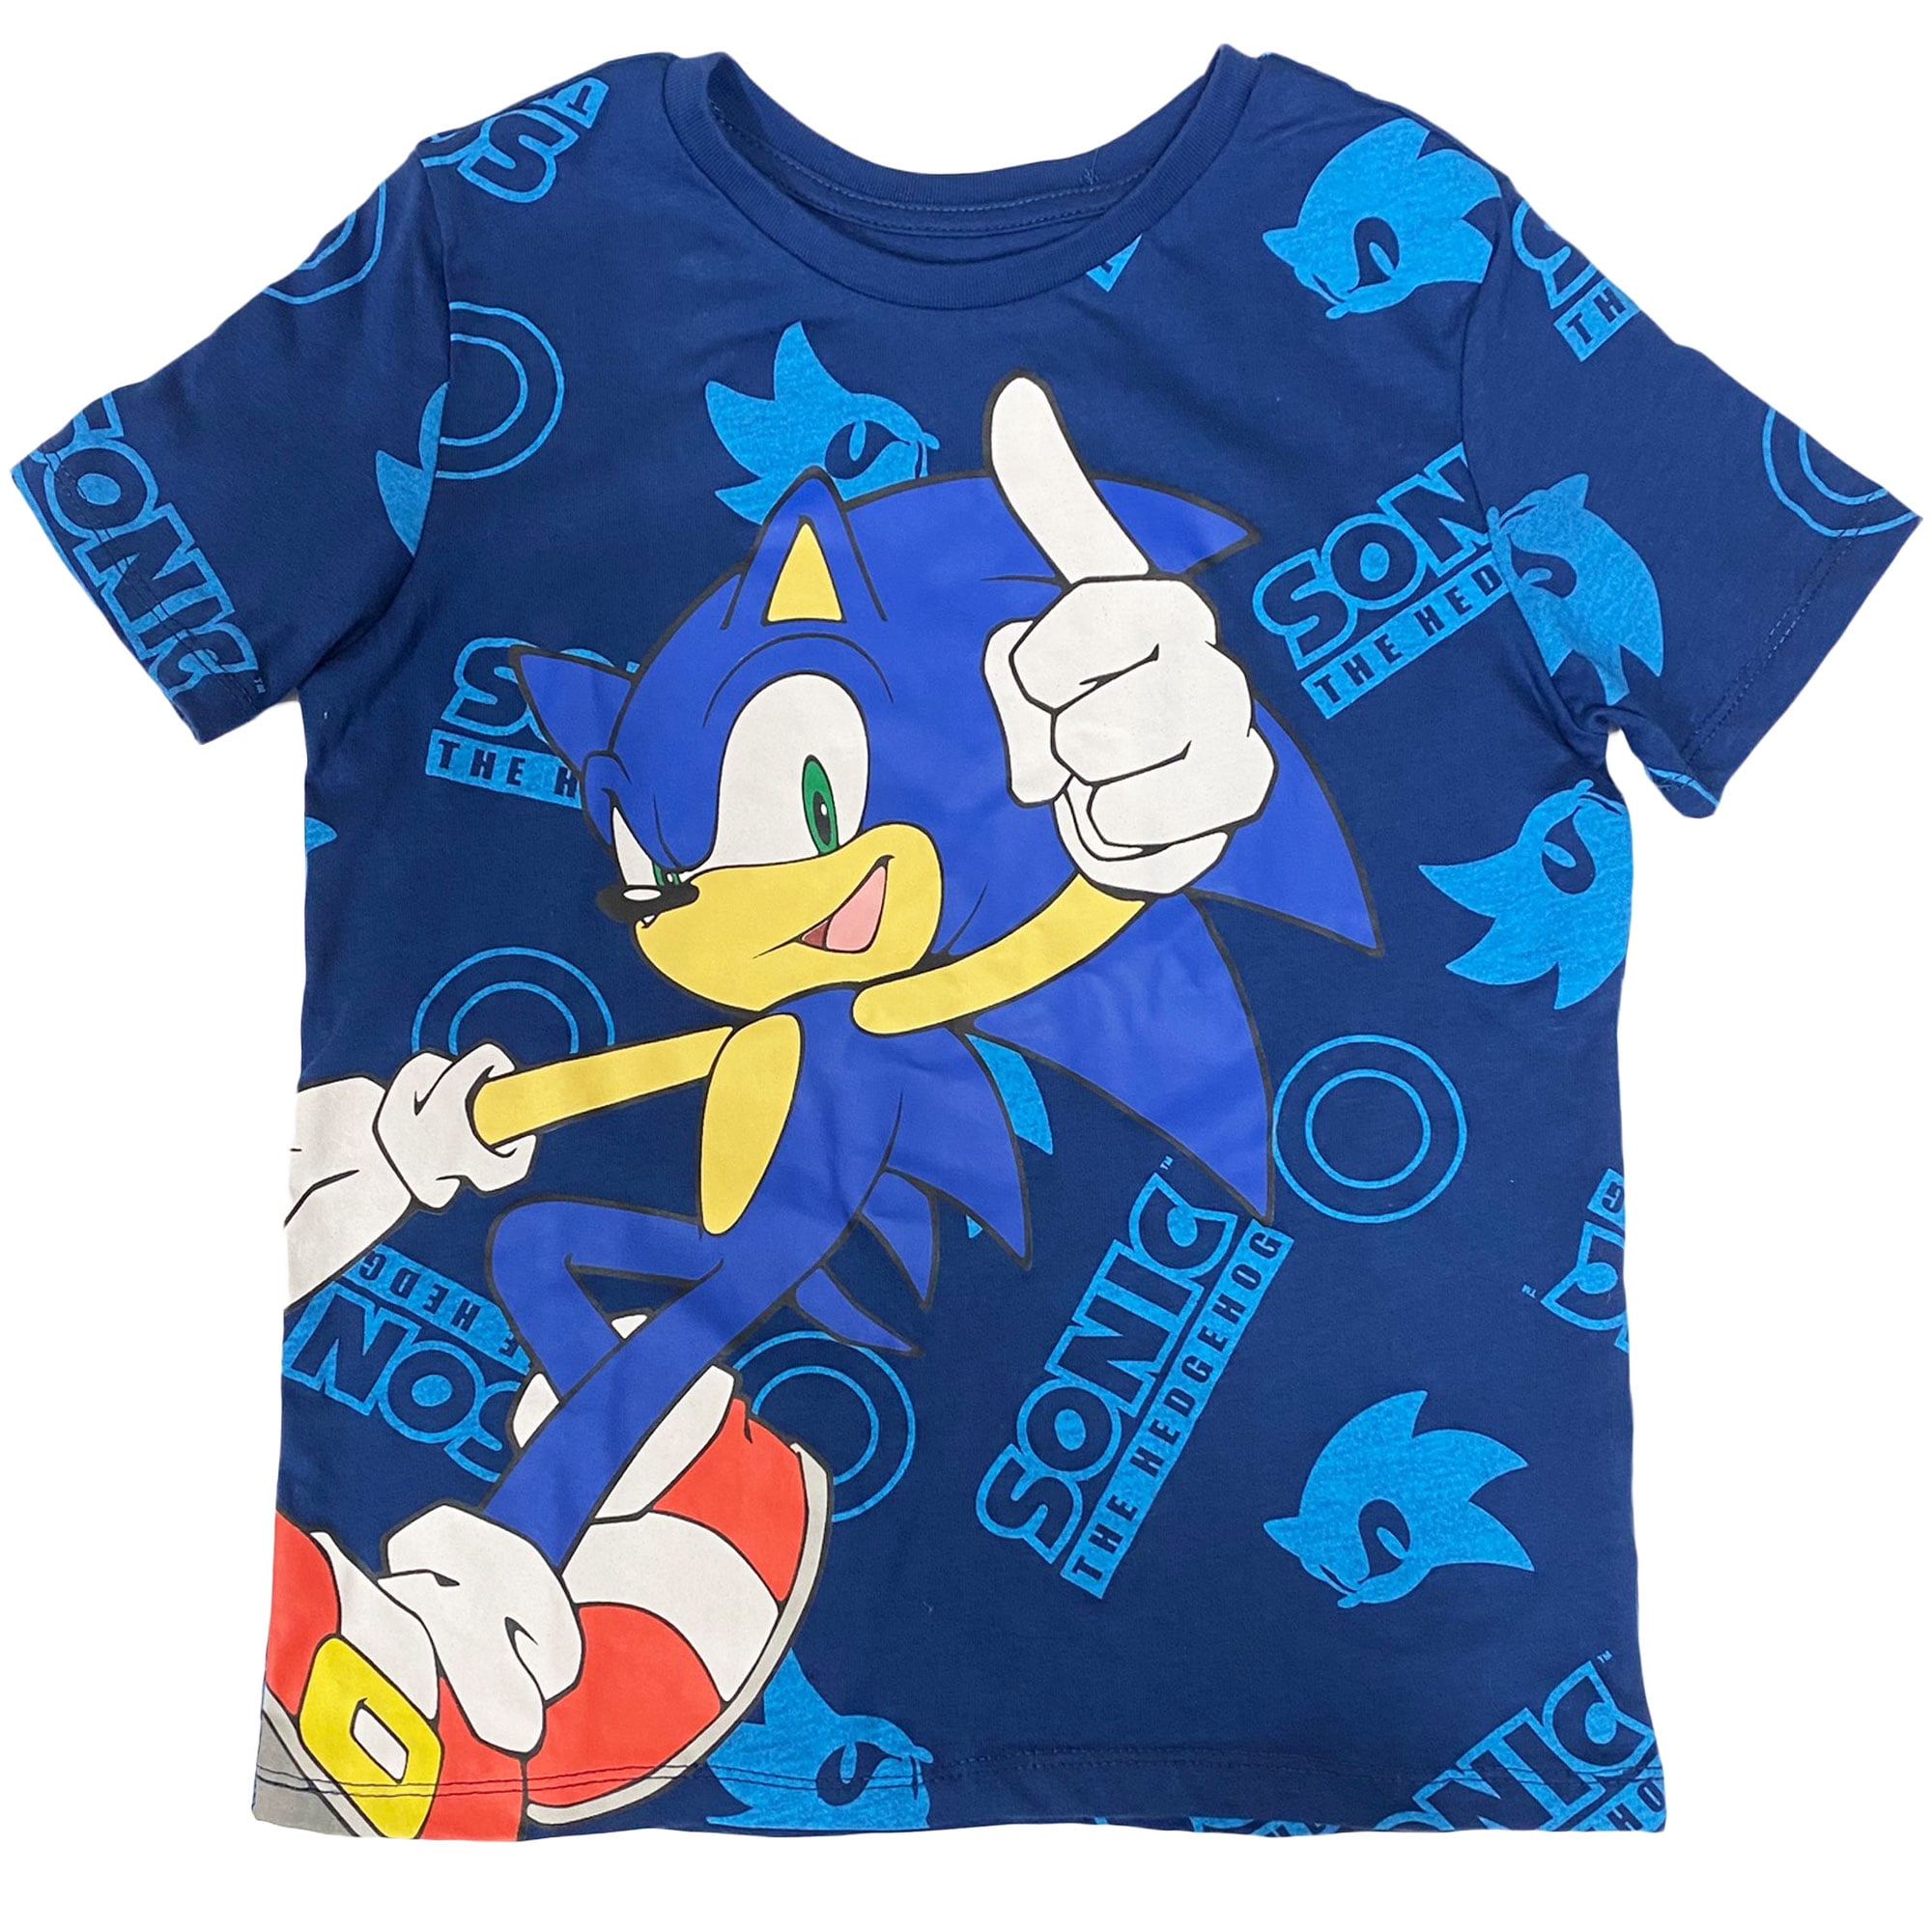 Gaming Gifts for Teenagers Sonic The Hedgehog Clothes Boys Blue T Shirt Super Soft Cotton Tops